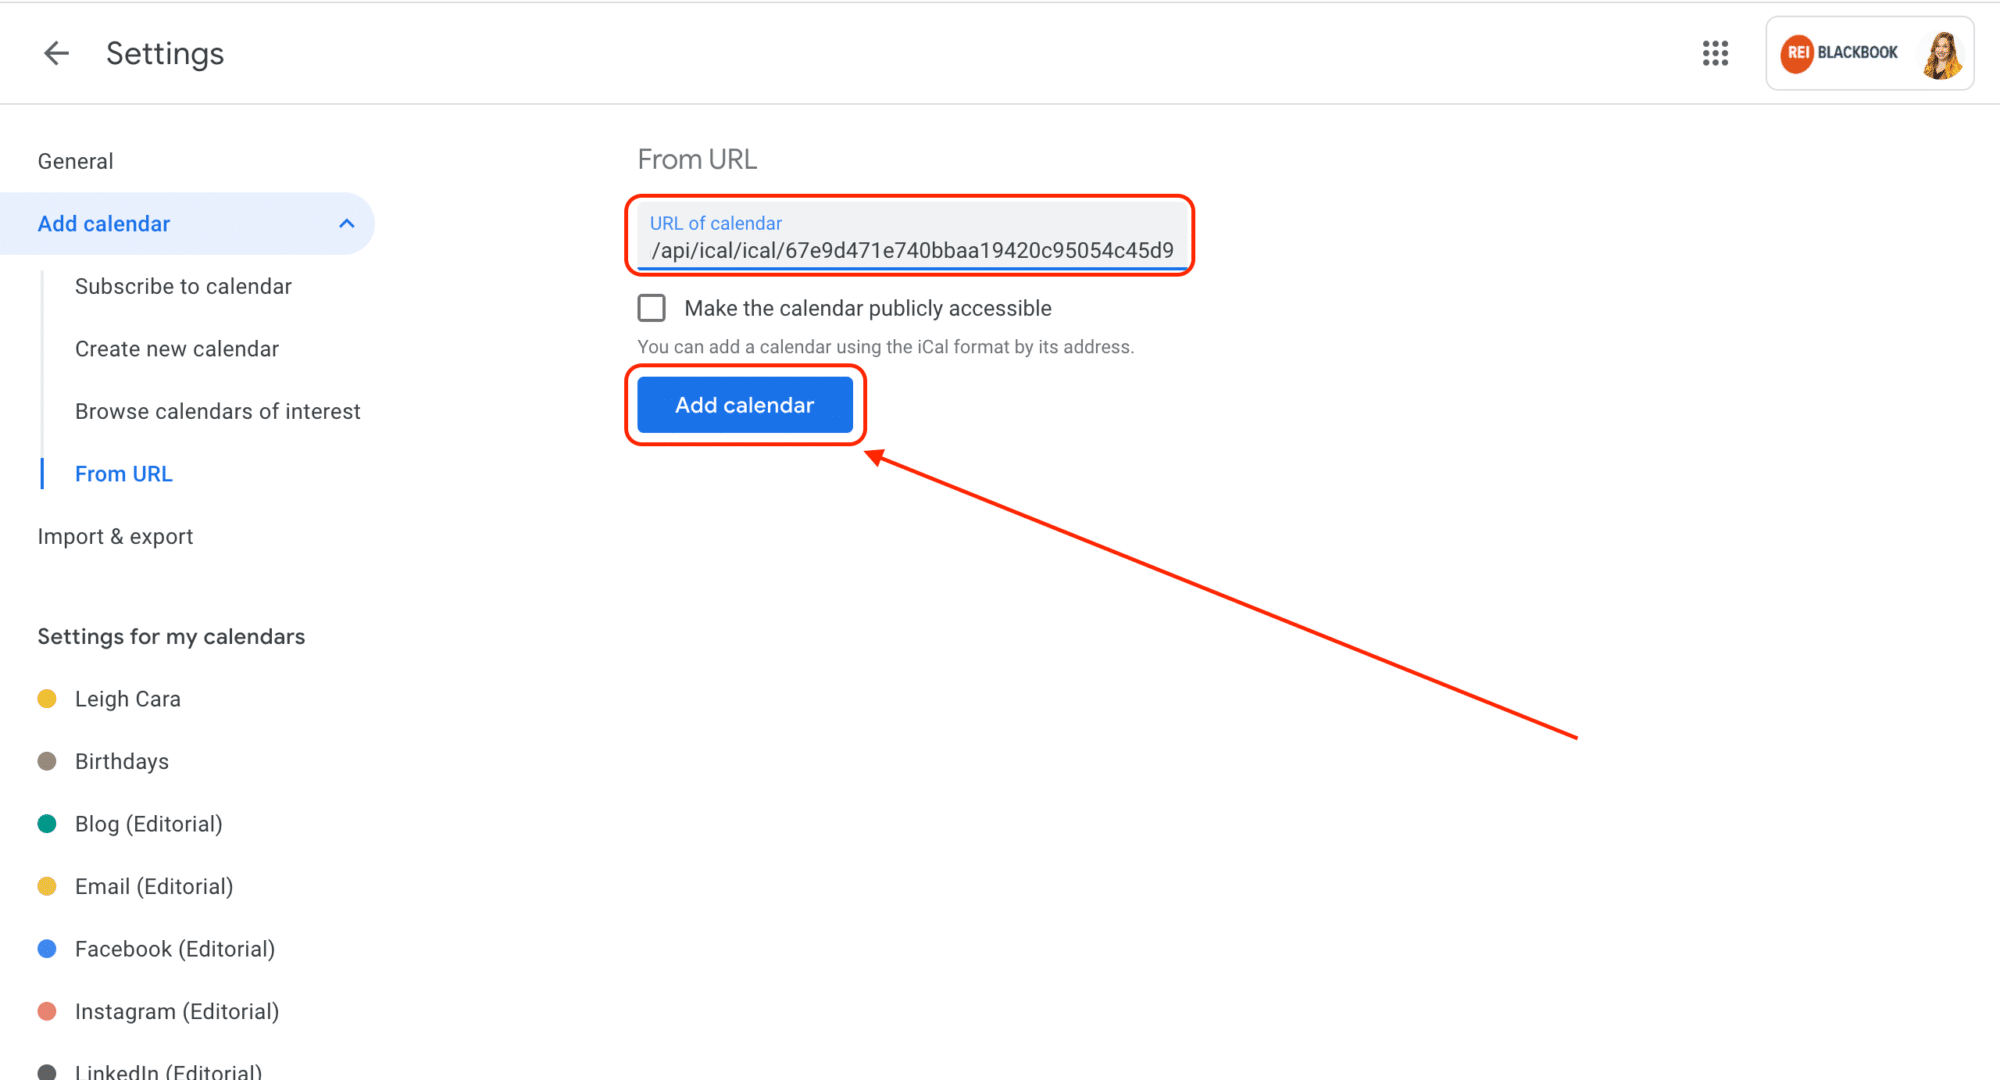 Enter the URL to activate calendar sync and click save.